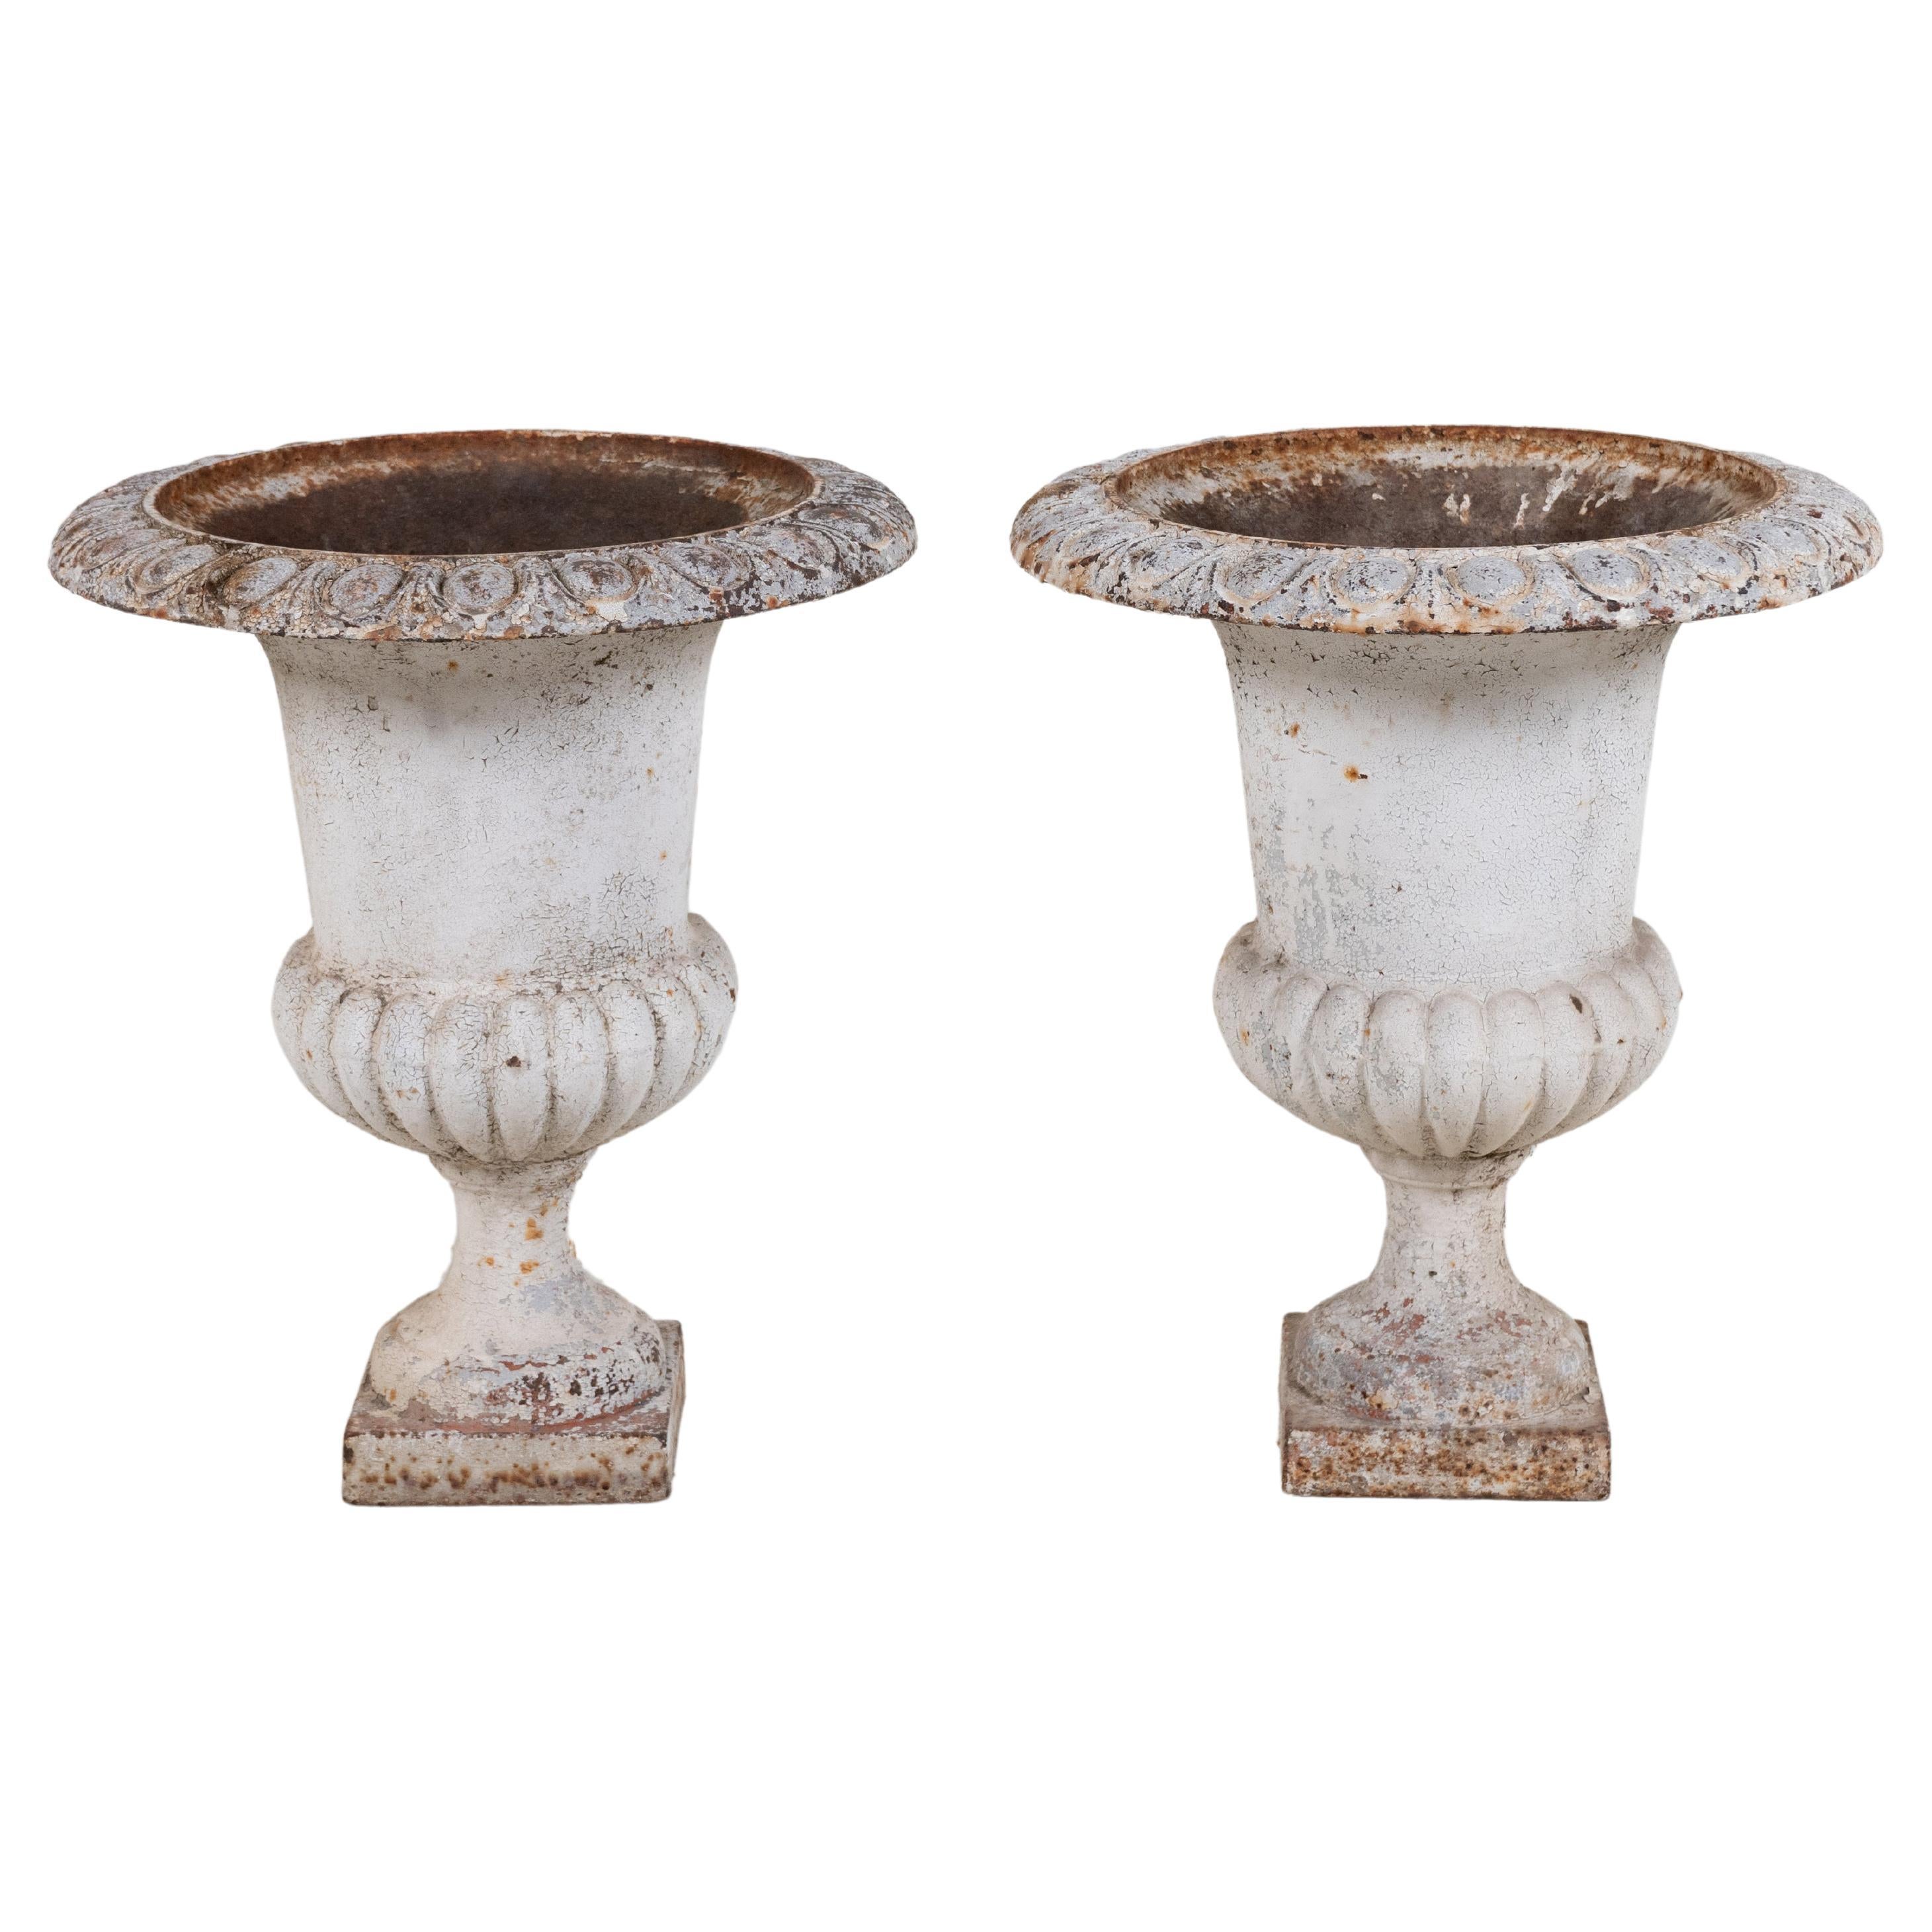 A Pair of Cast Iron Urns with White Patina, France c.1900